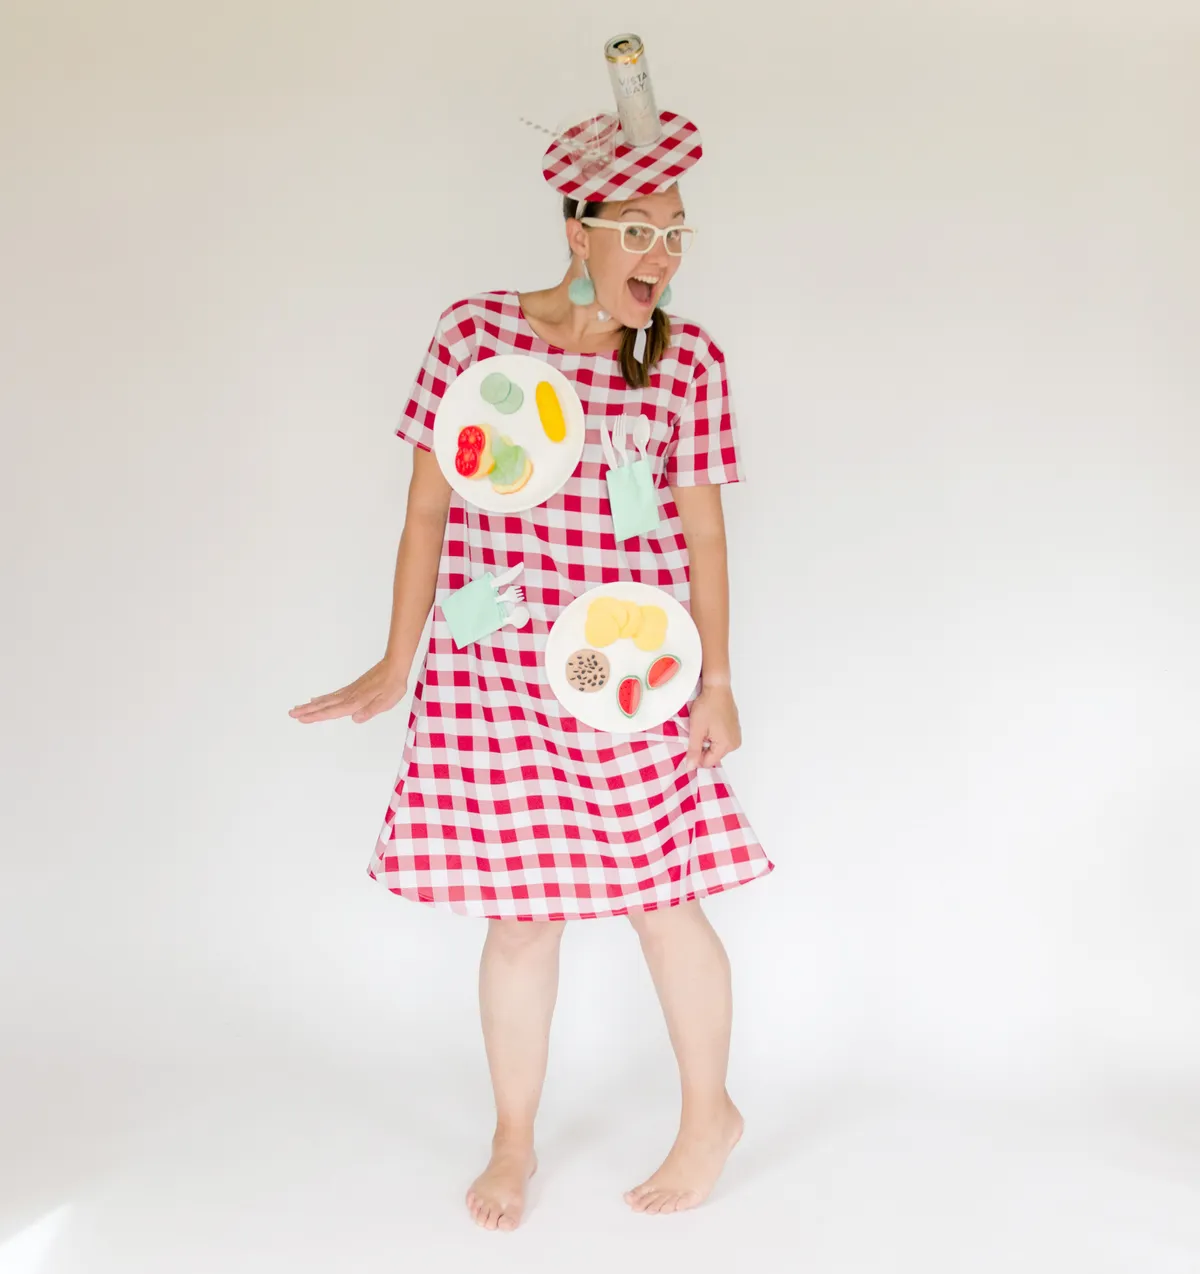 Picnic table costume by Ohyaystudio.com